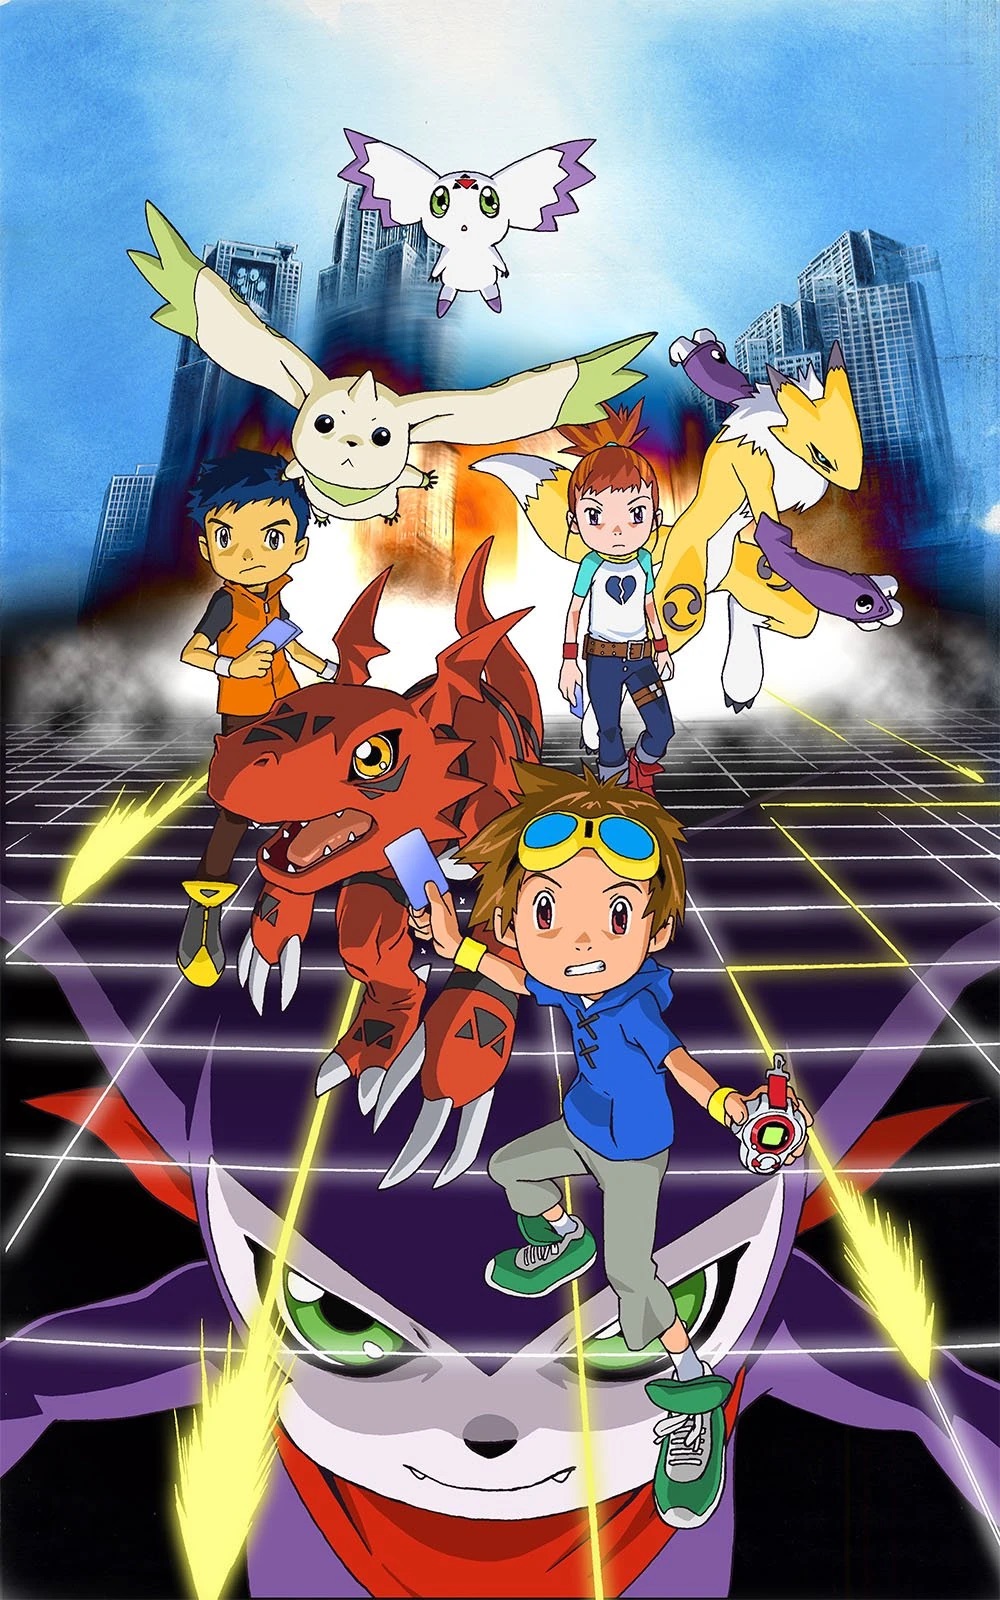 Digimon's latest film gets stateside theatrical release (update) - Polygon